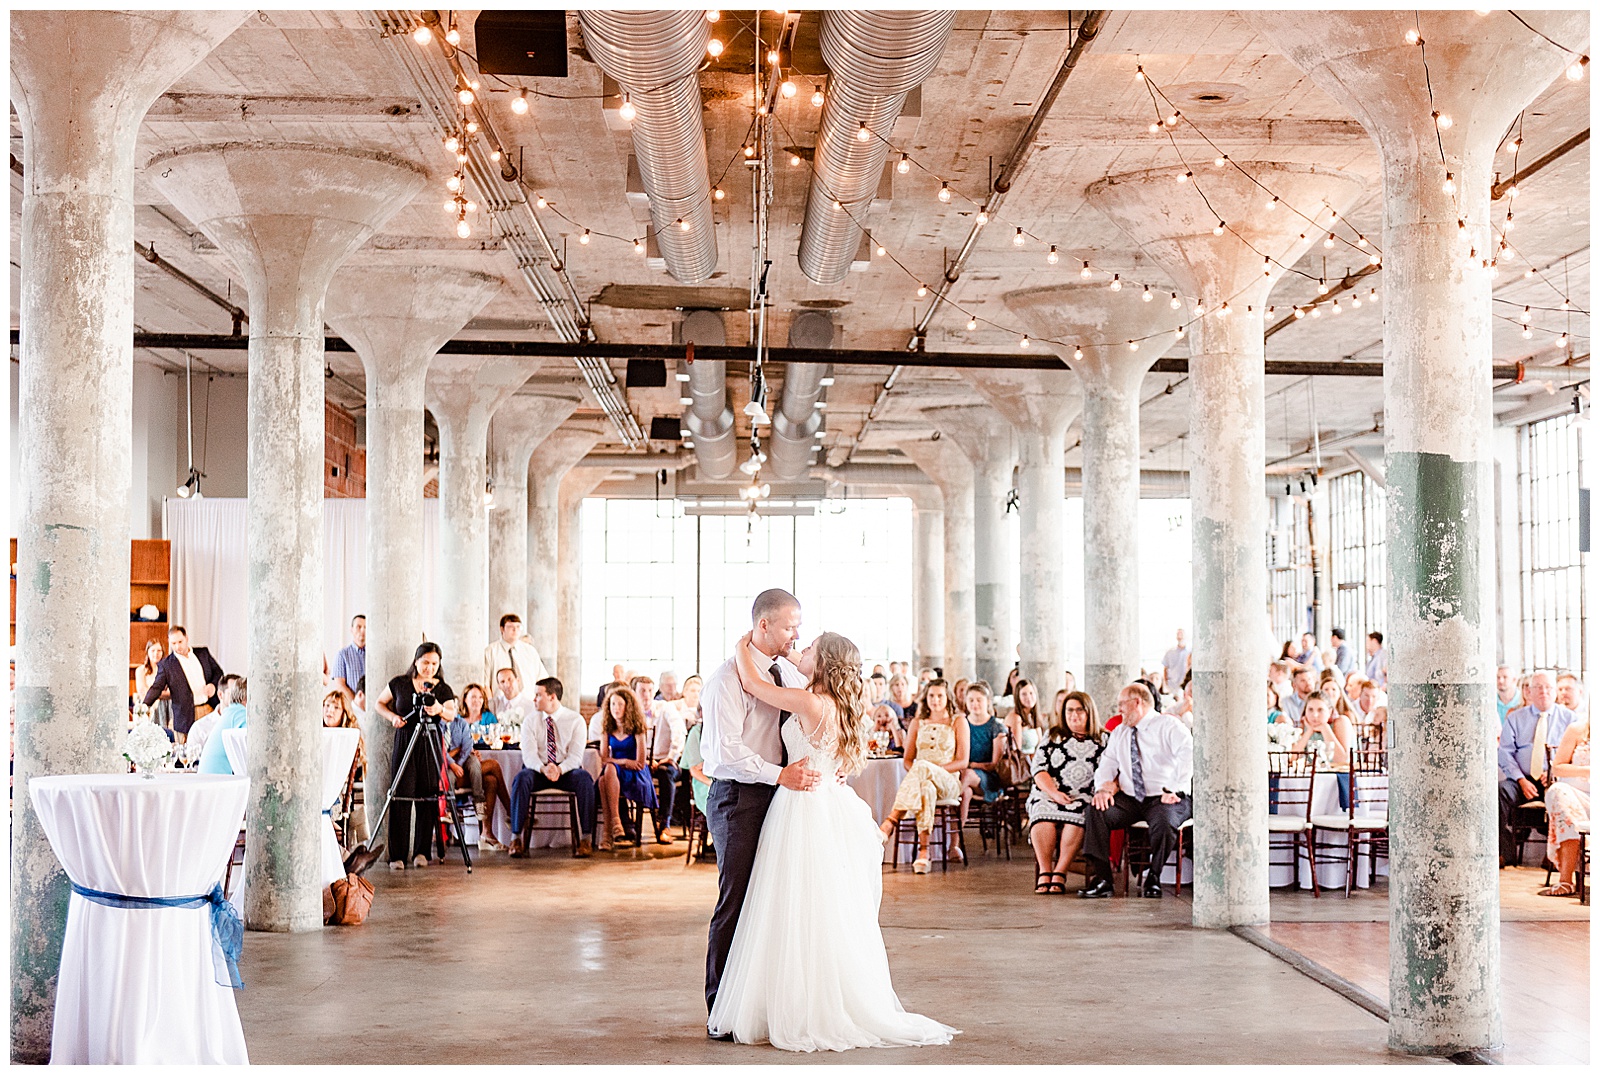 Bride and Groom First Dance at Rustic Airy Indoor Wedding Venue with fairy lights in Elegant Modern Summer Wedding in Charlotte, NC | check out the full wedding at KevynDixonPhoto.com